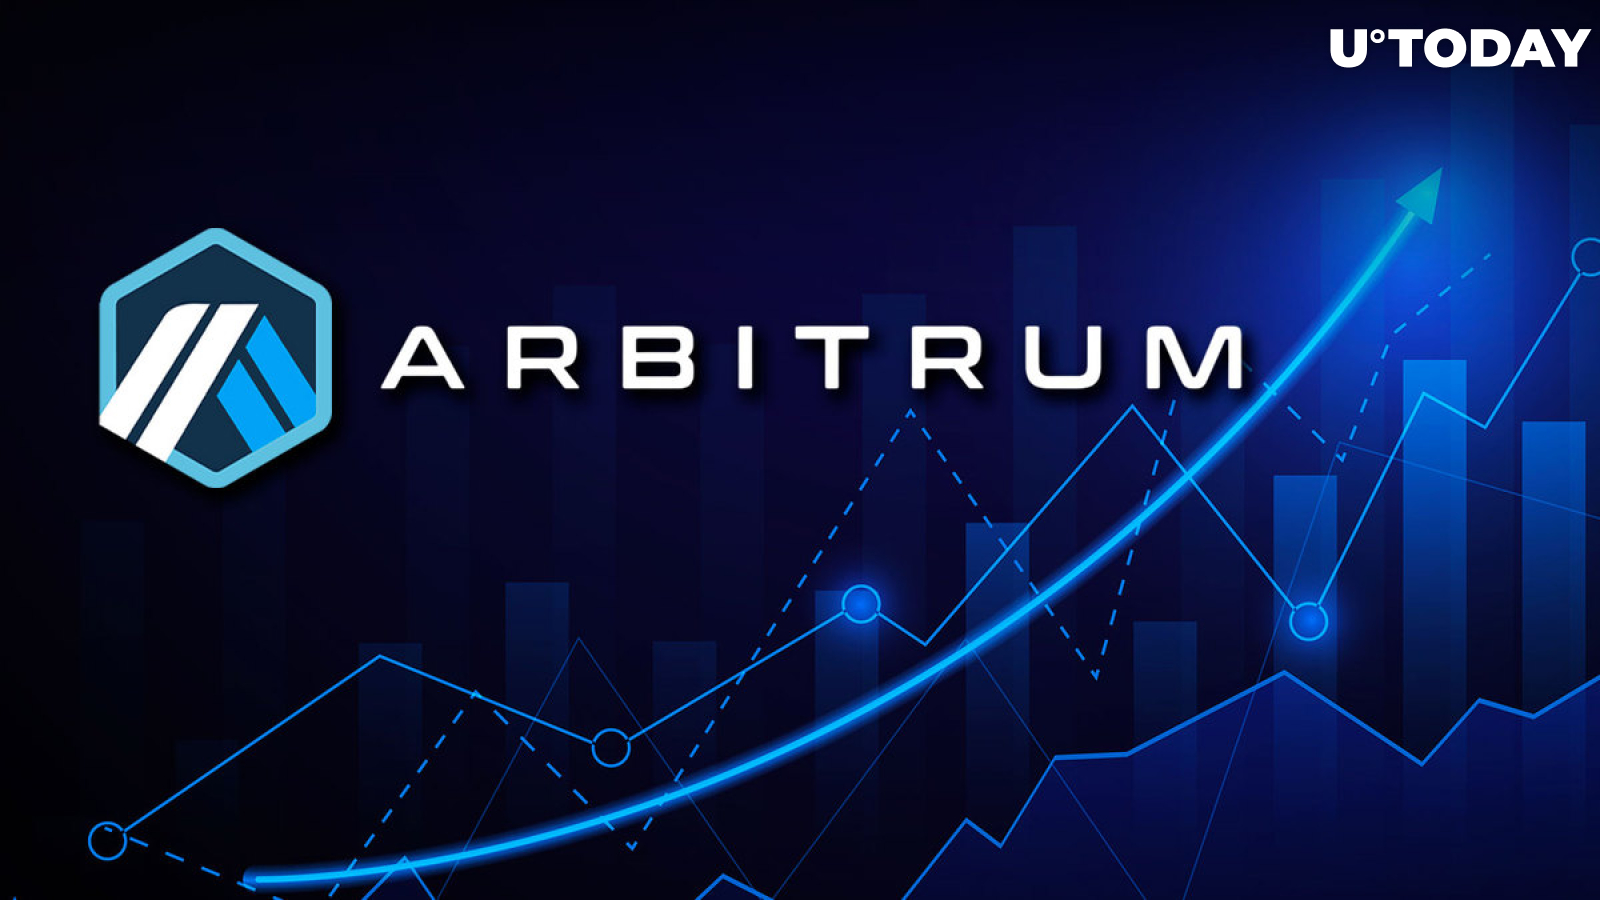 Arbitrum (ARB) Jumps 10% to Break Long Stalemate, More Surge to Come?